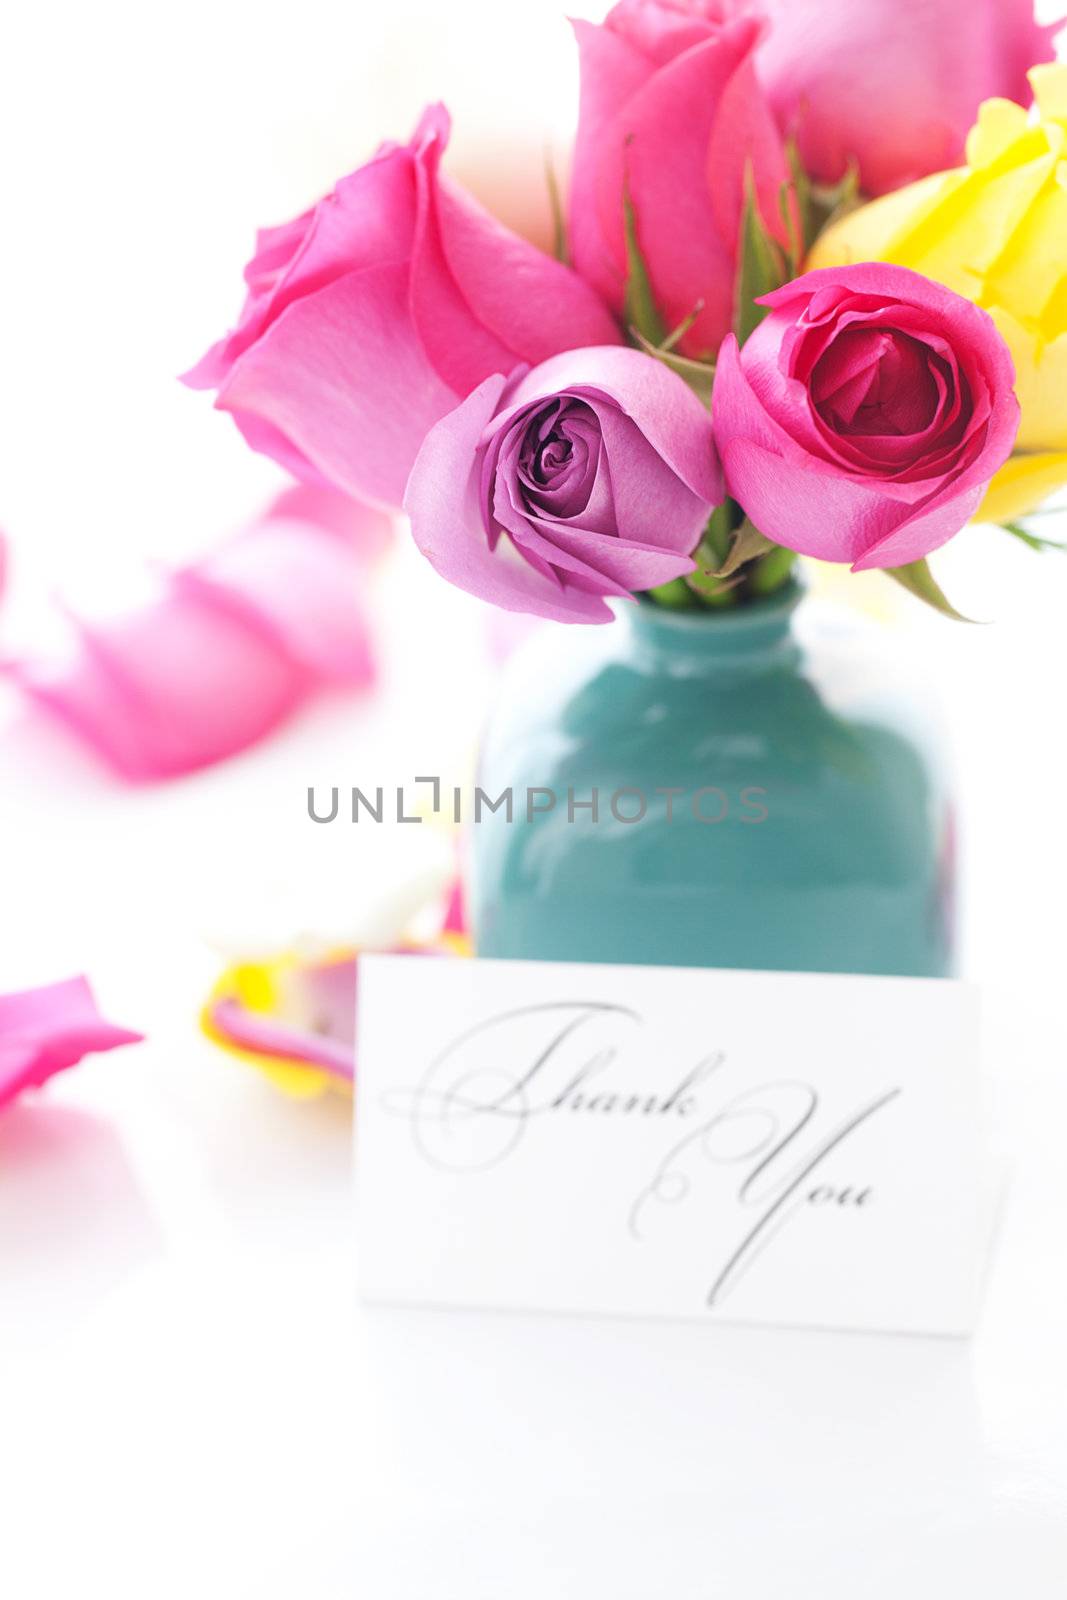 bouquet of colorful roses in vase,petals and card with the words thank you